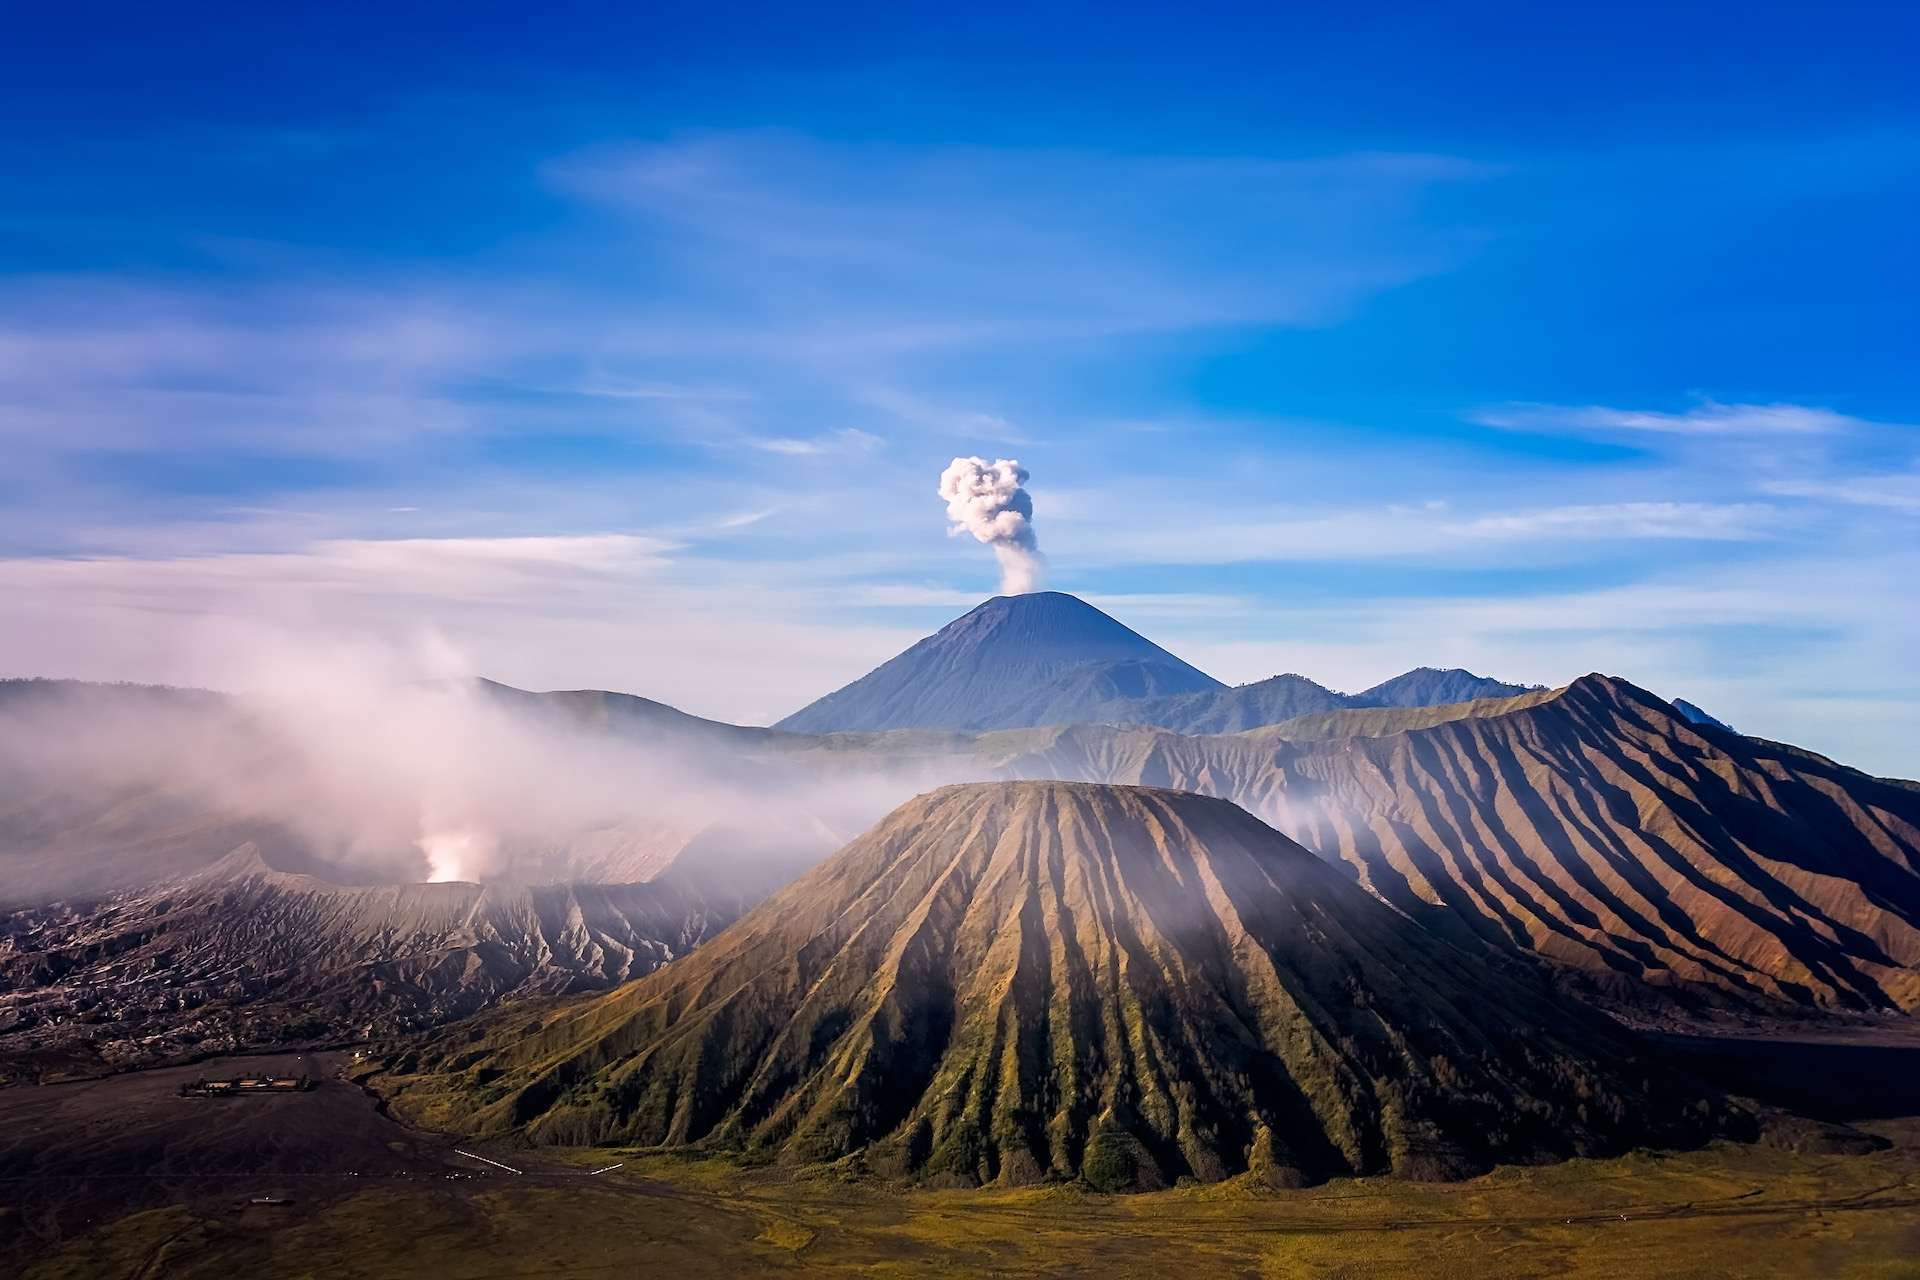 Volcano eruption at Mount Semeru has prompted an alert in Indonesia